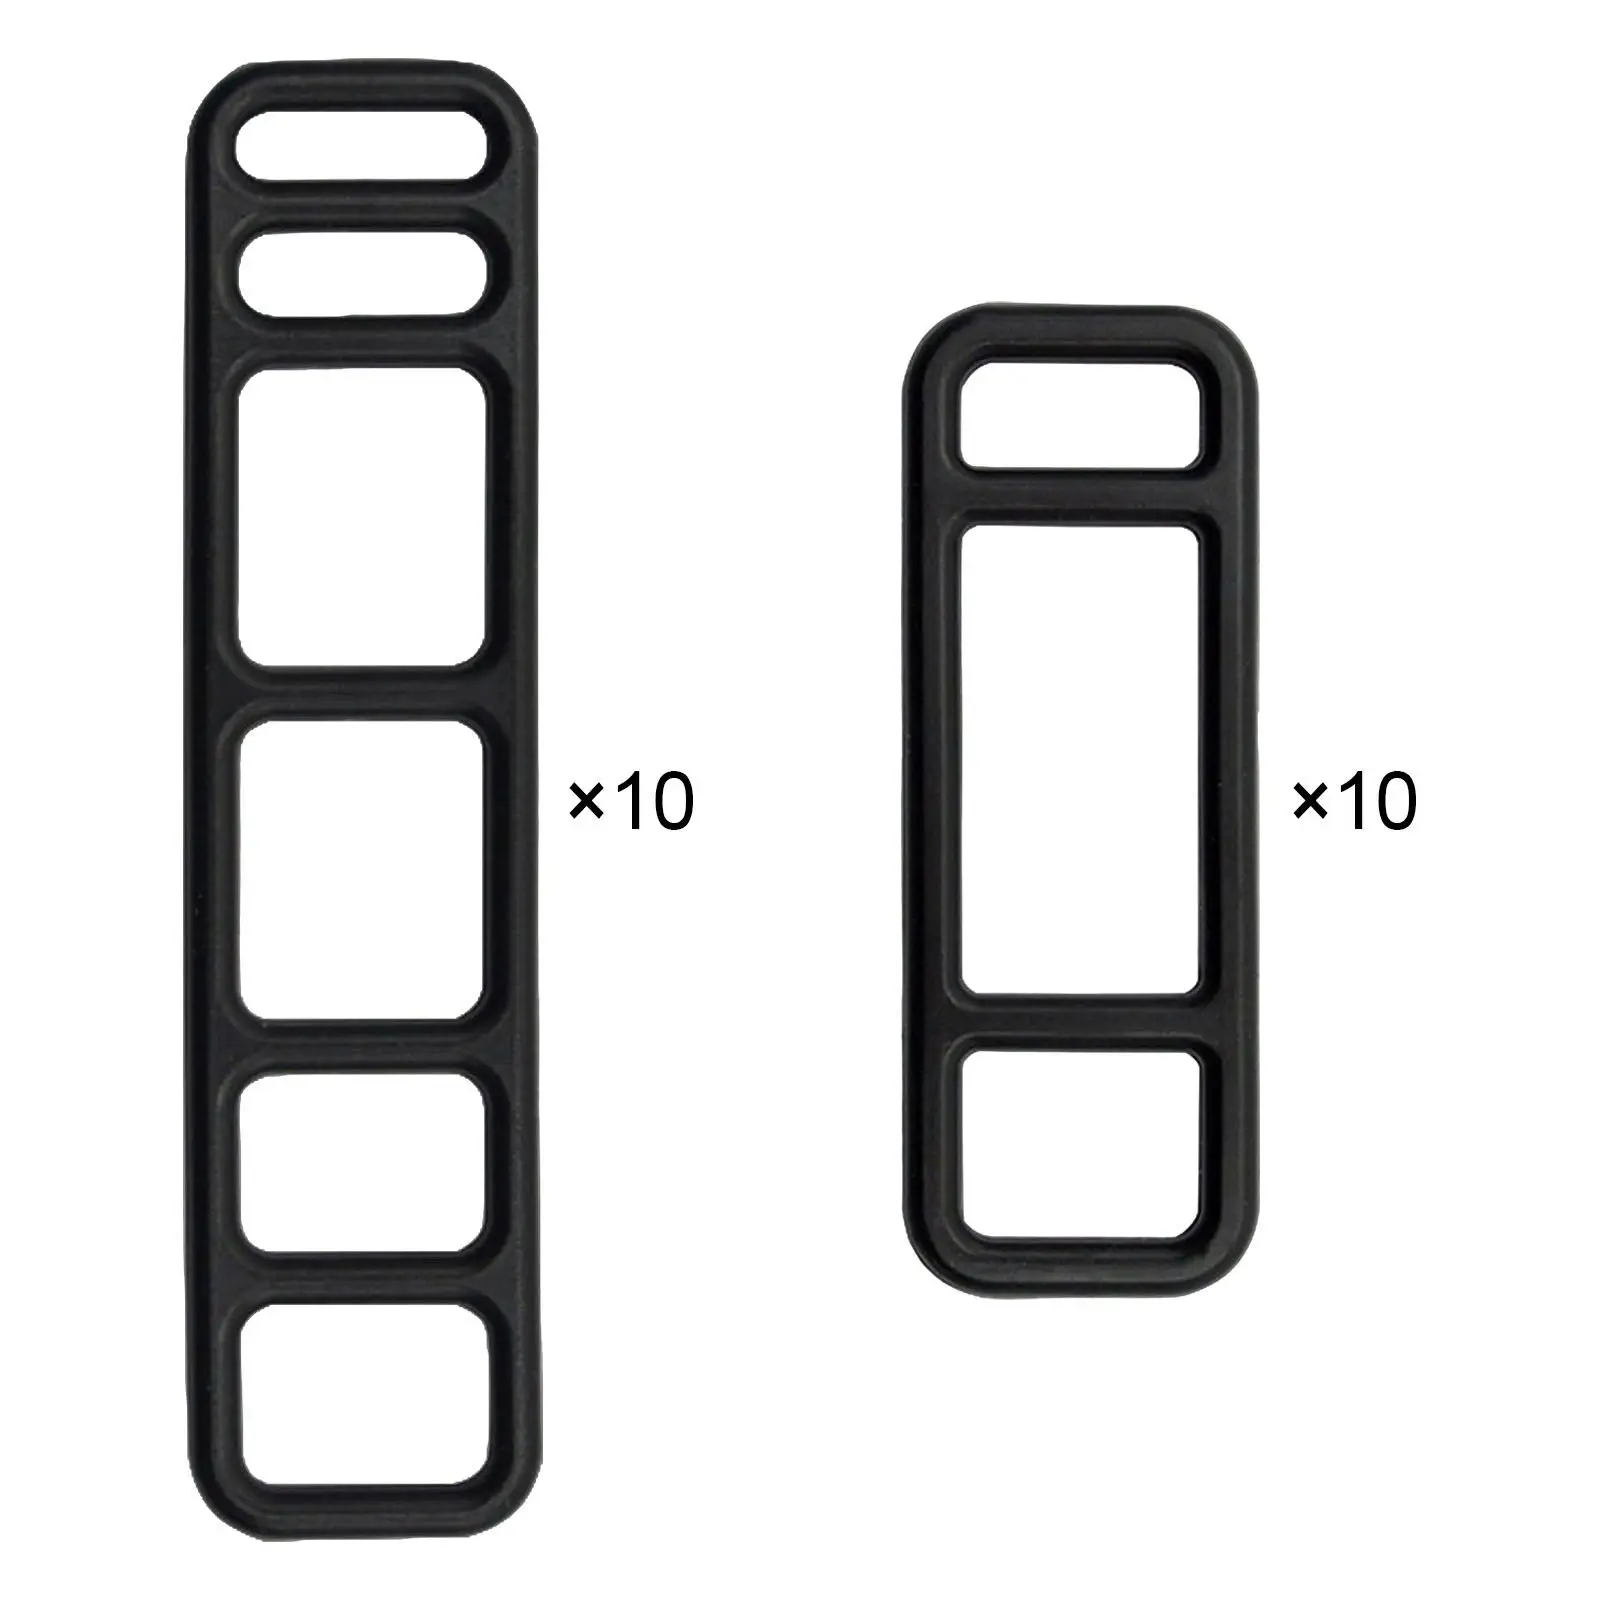 Auto Rearview mirror fixed strap Strip Silicon Rubber Belt Buckle Bracket Line Buckle Buckle Rubber Band